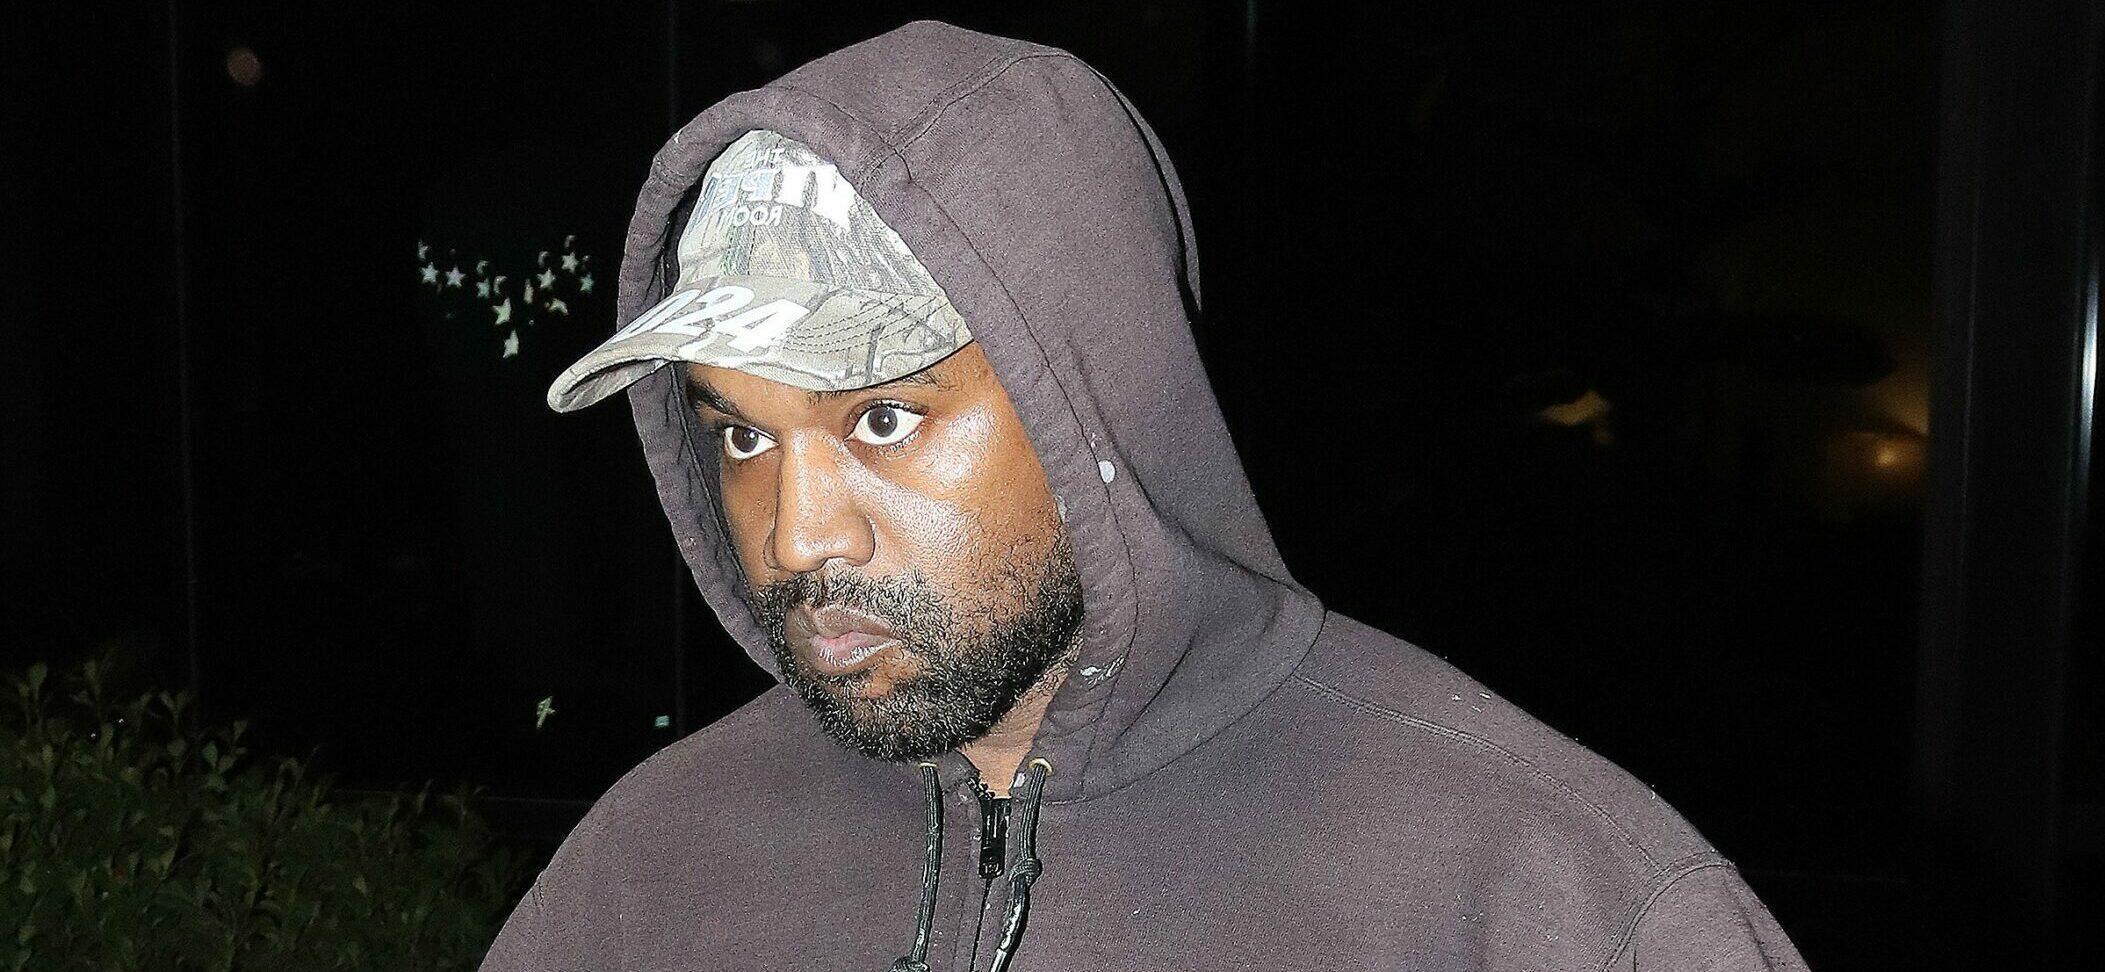 Kanye West Launches $200 Yeezy Pods Footwear After Apology For Anti-Semitic Remarks